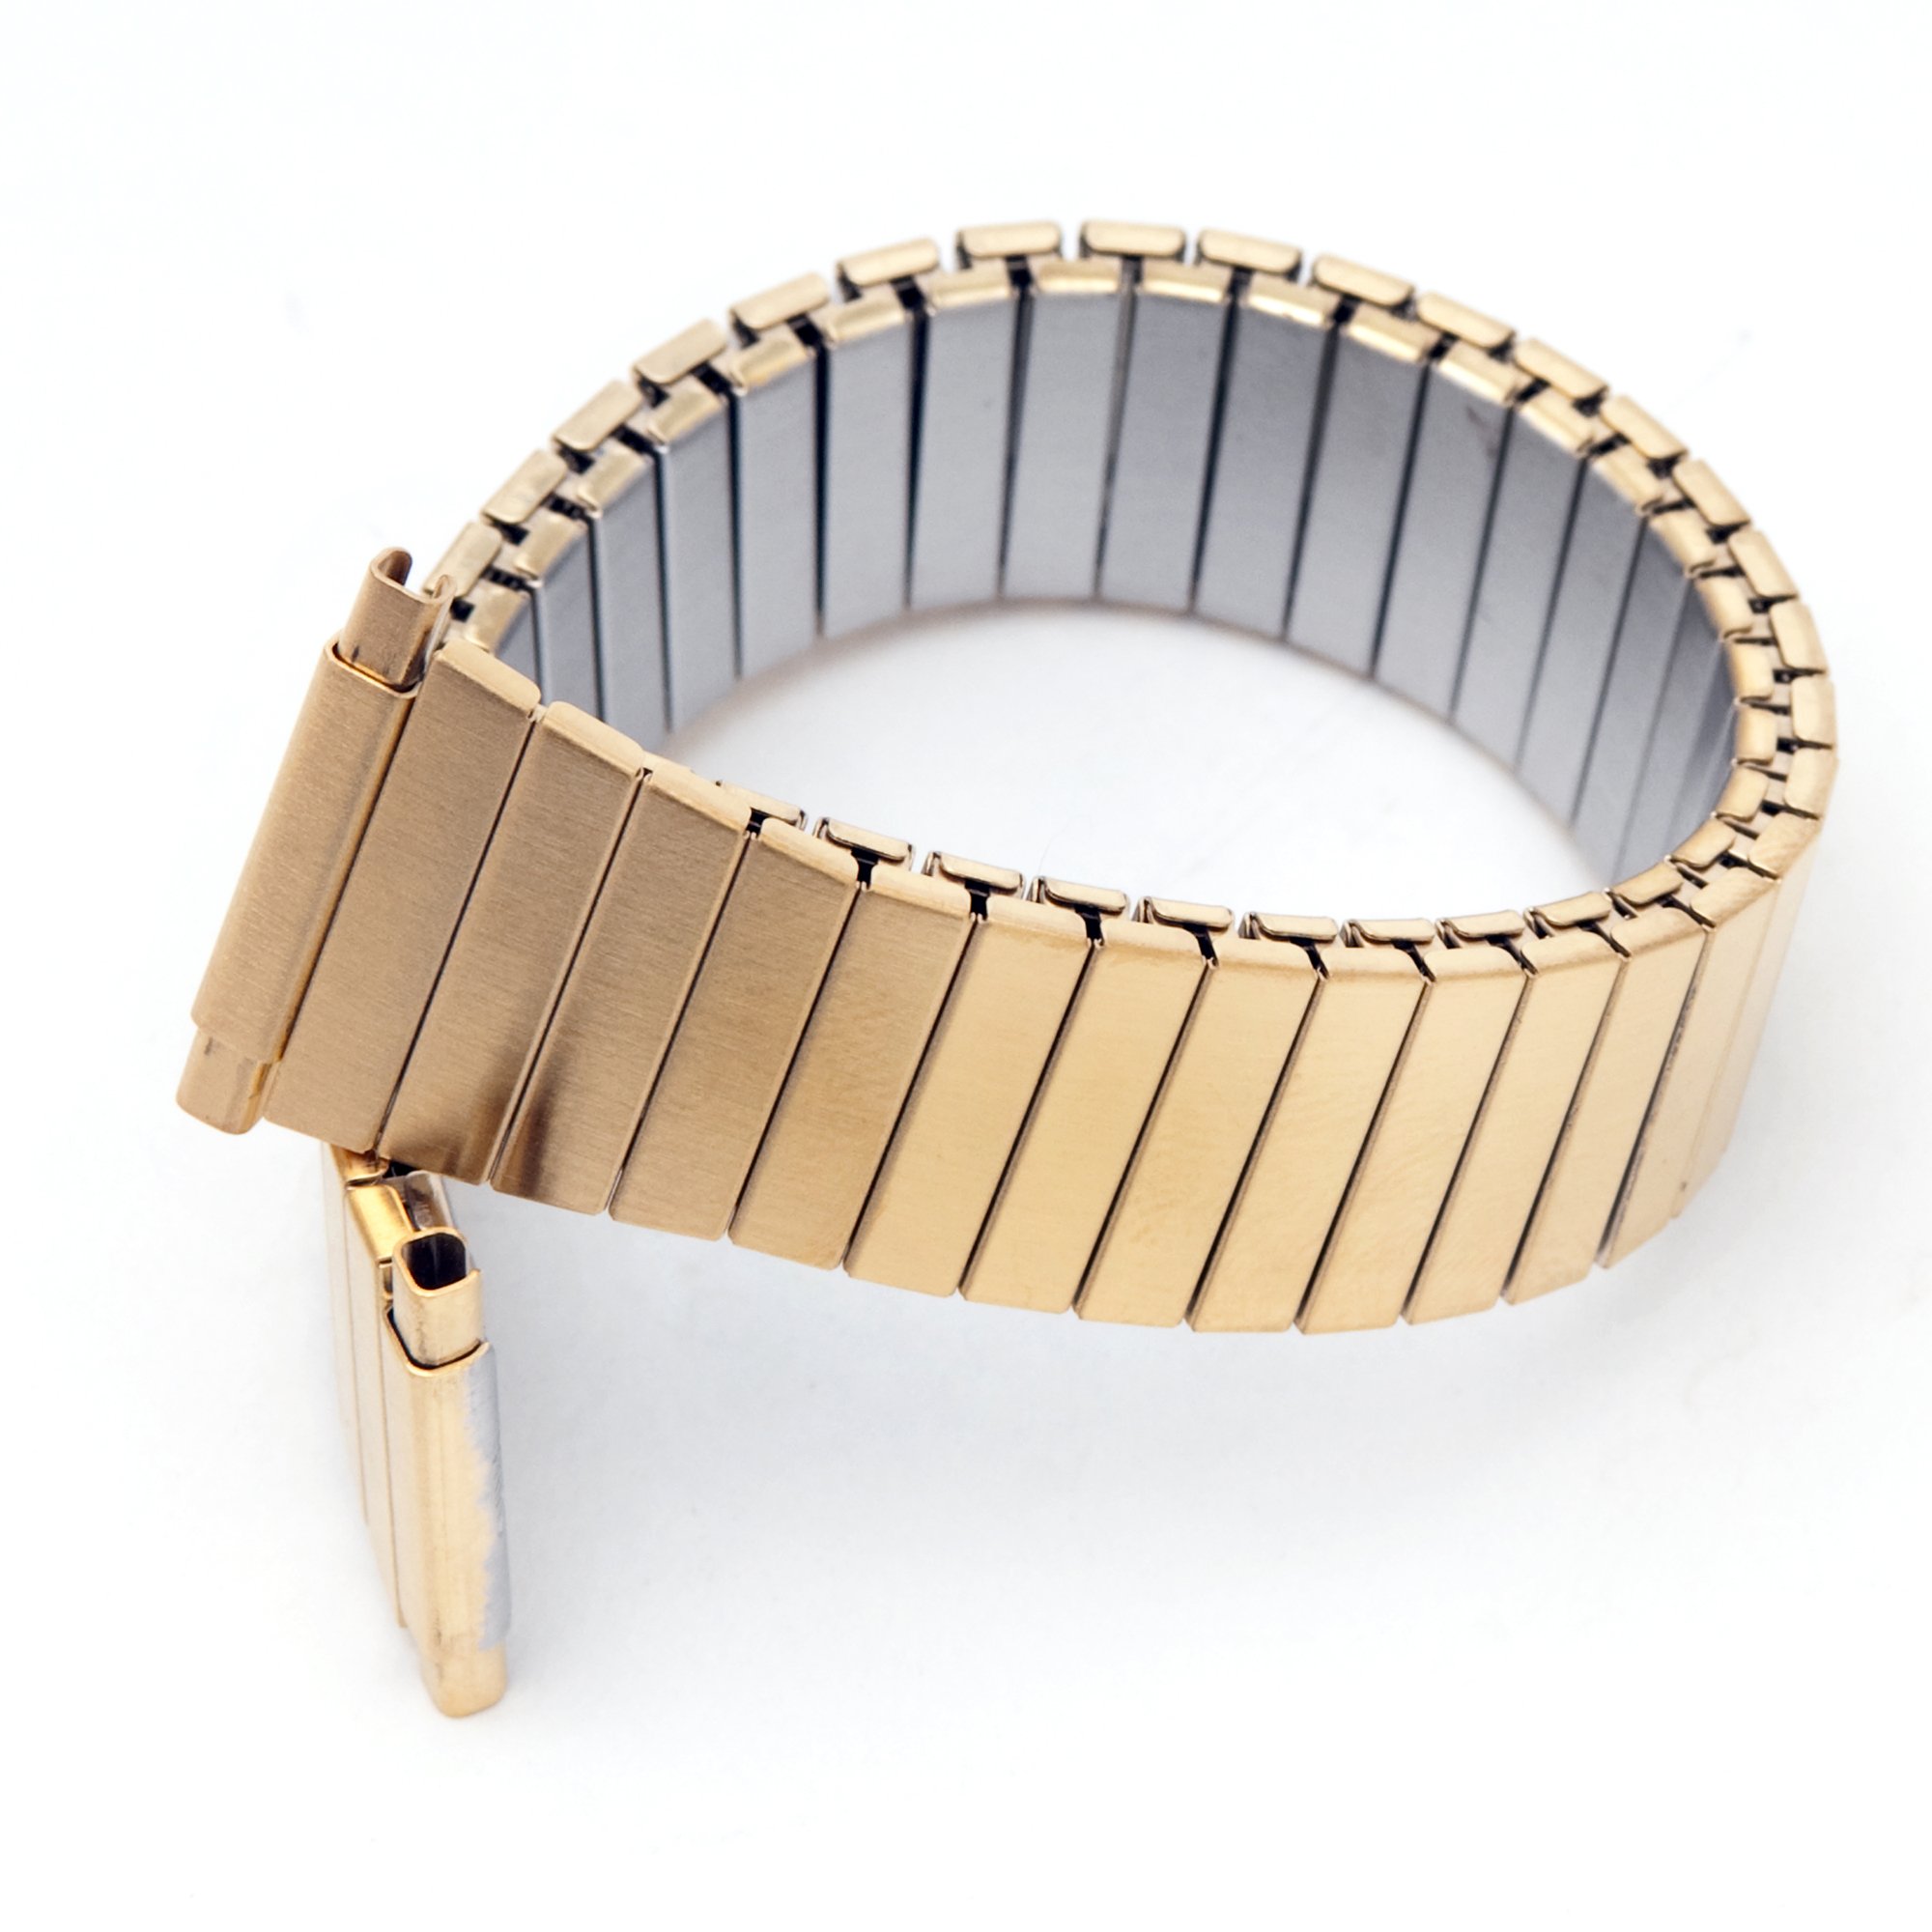 Voguestrap TX921Y Allstrap 15-19mm Gold Long-Length Tapered Expansion Watchband